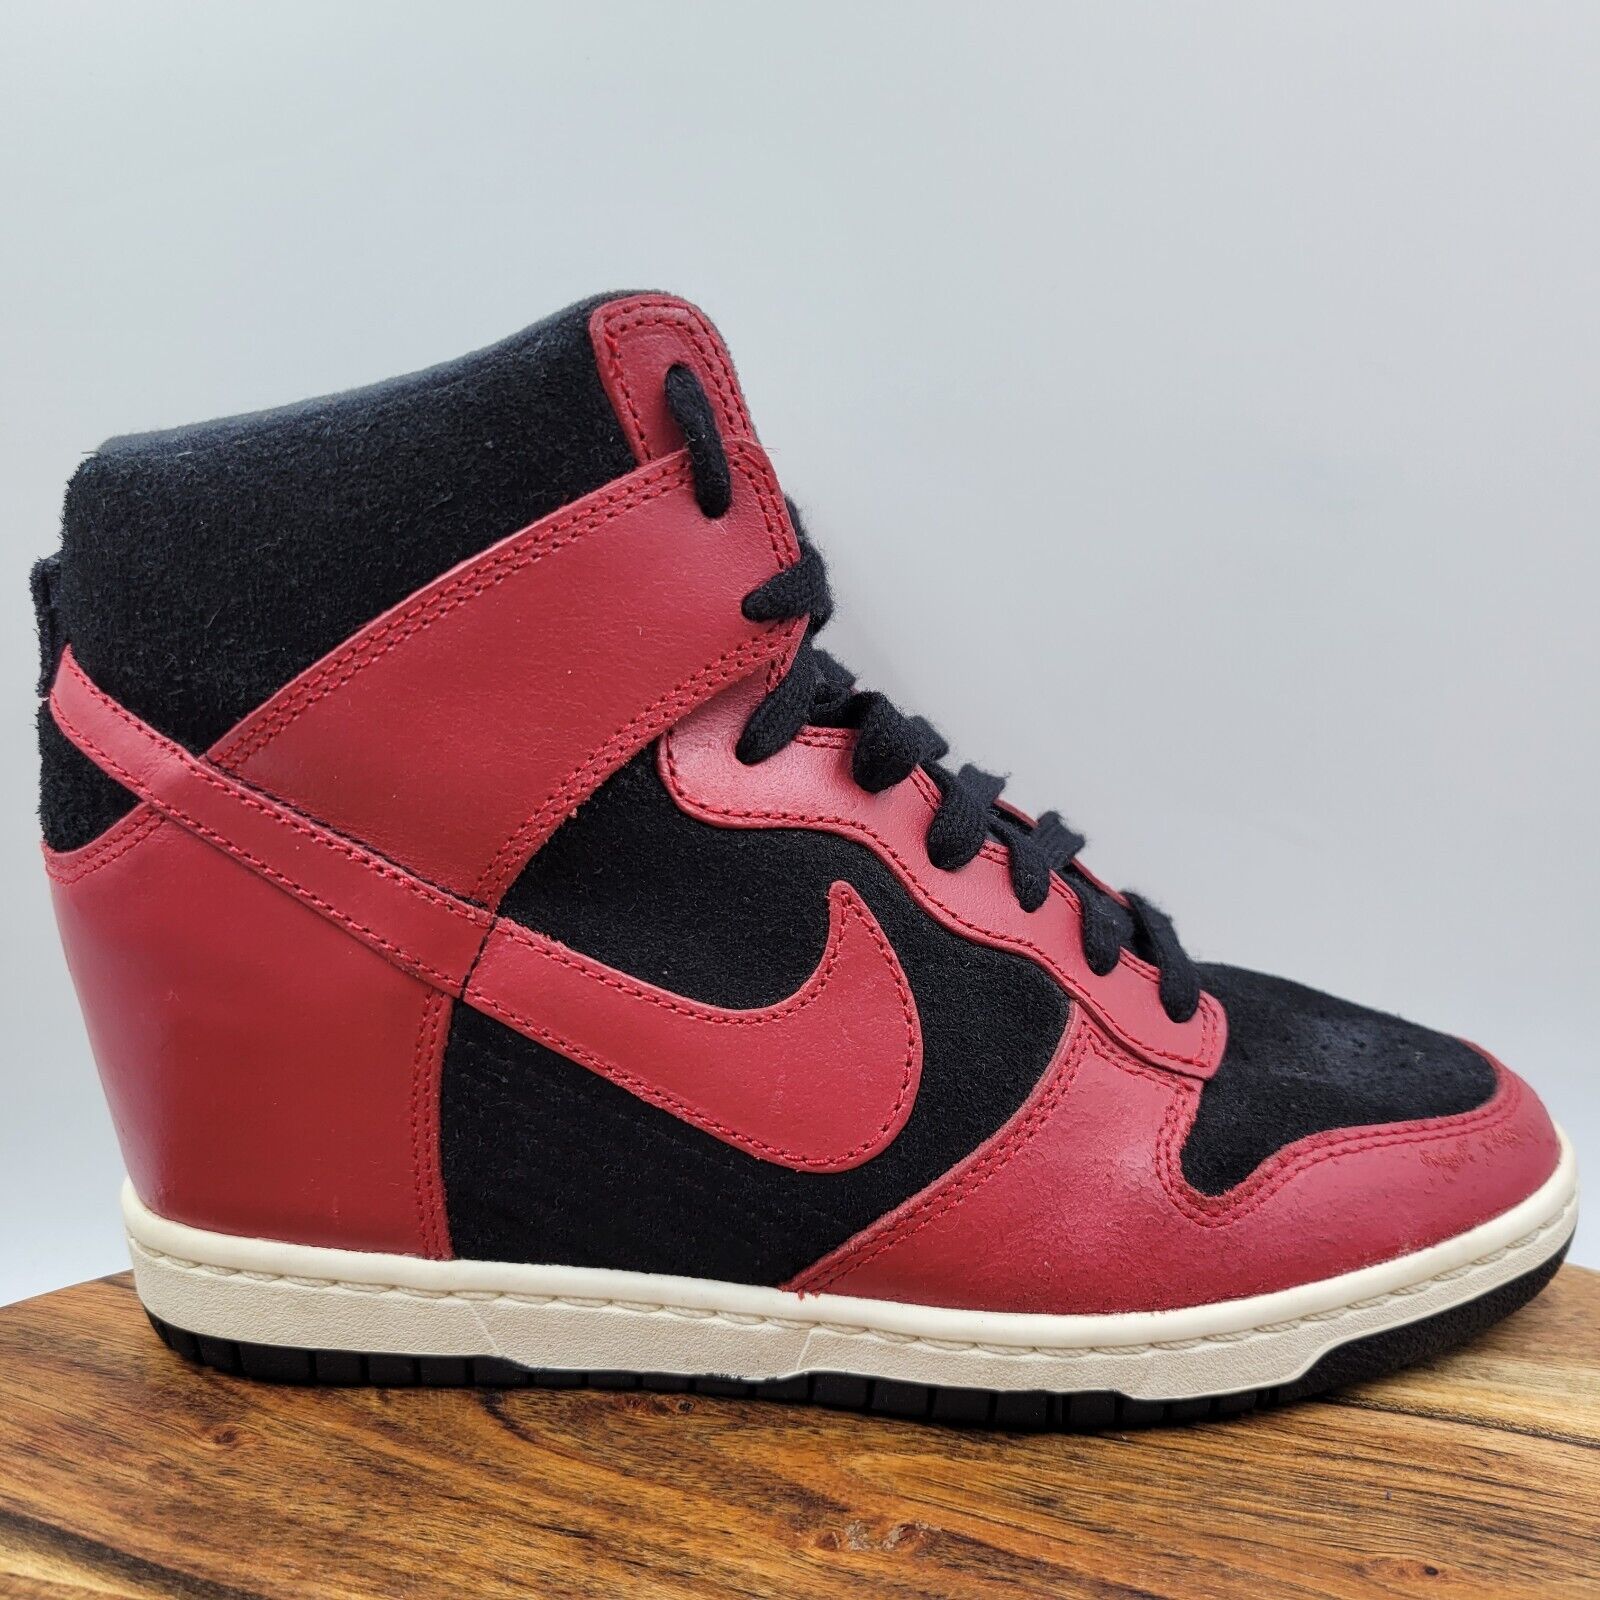 Nike Sky Hi Dunk Shoes Women's 8 Bred Red Black Leather Hidden Wedge  Sneakers